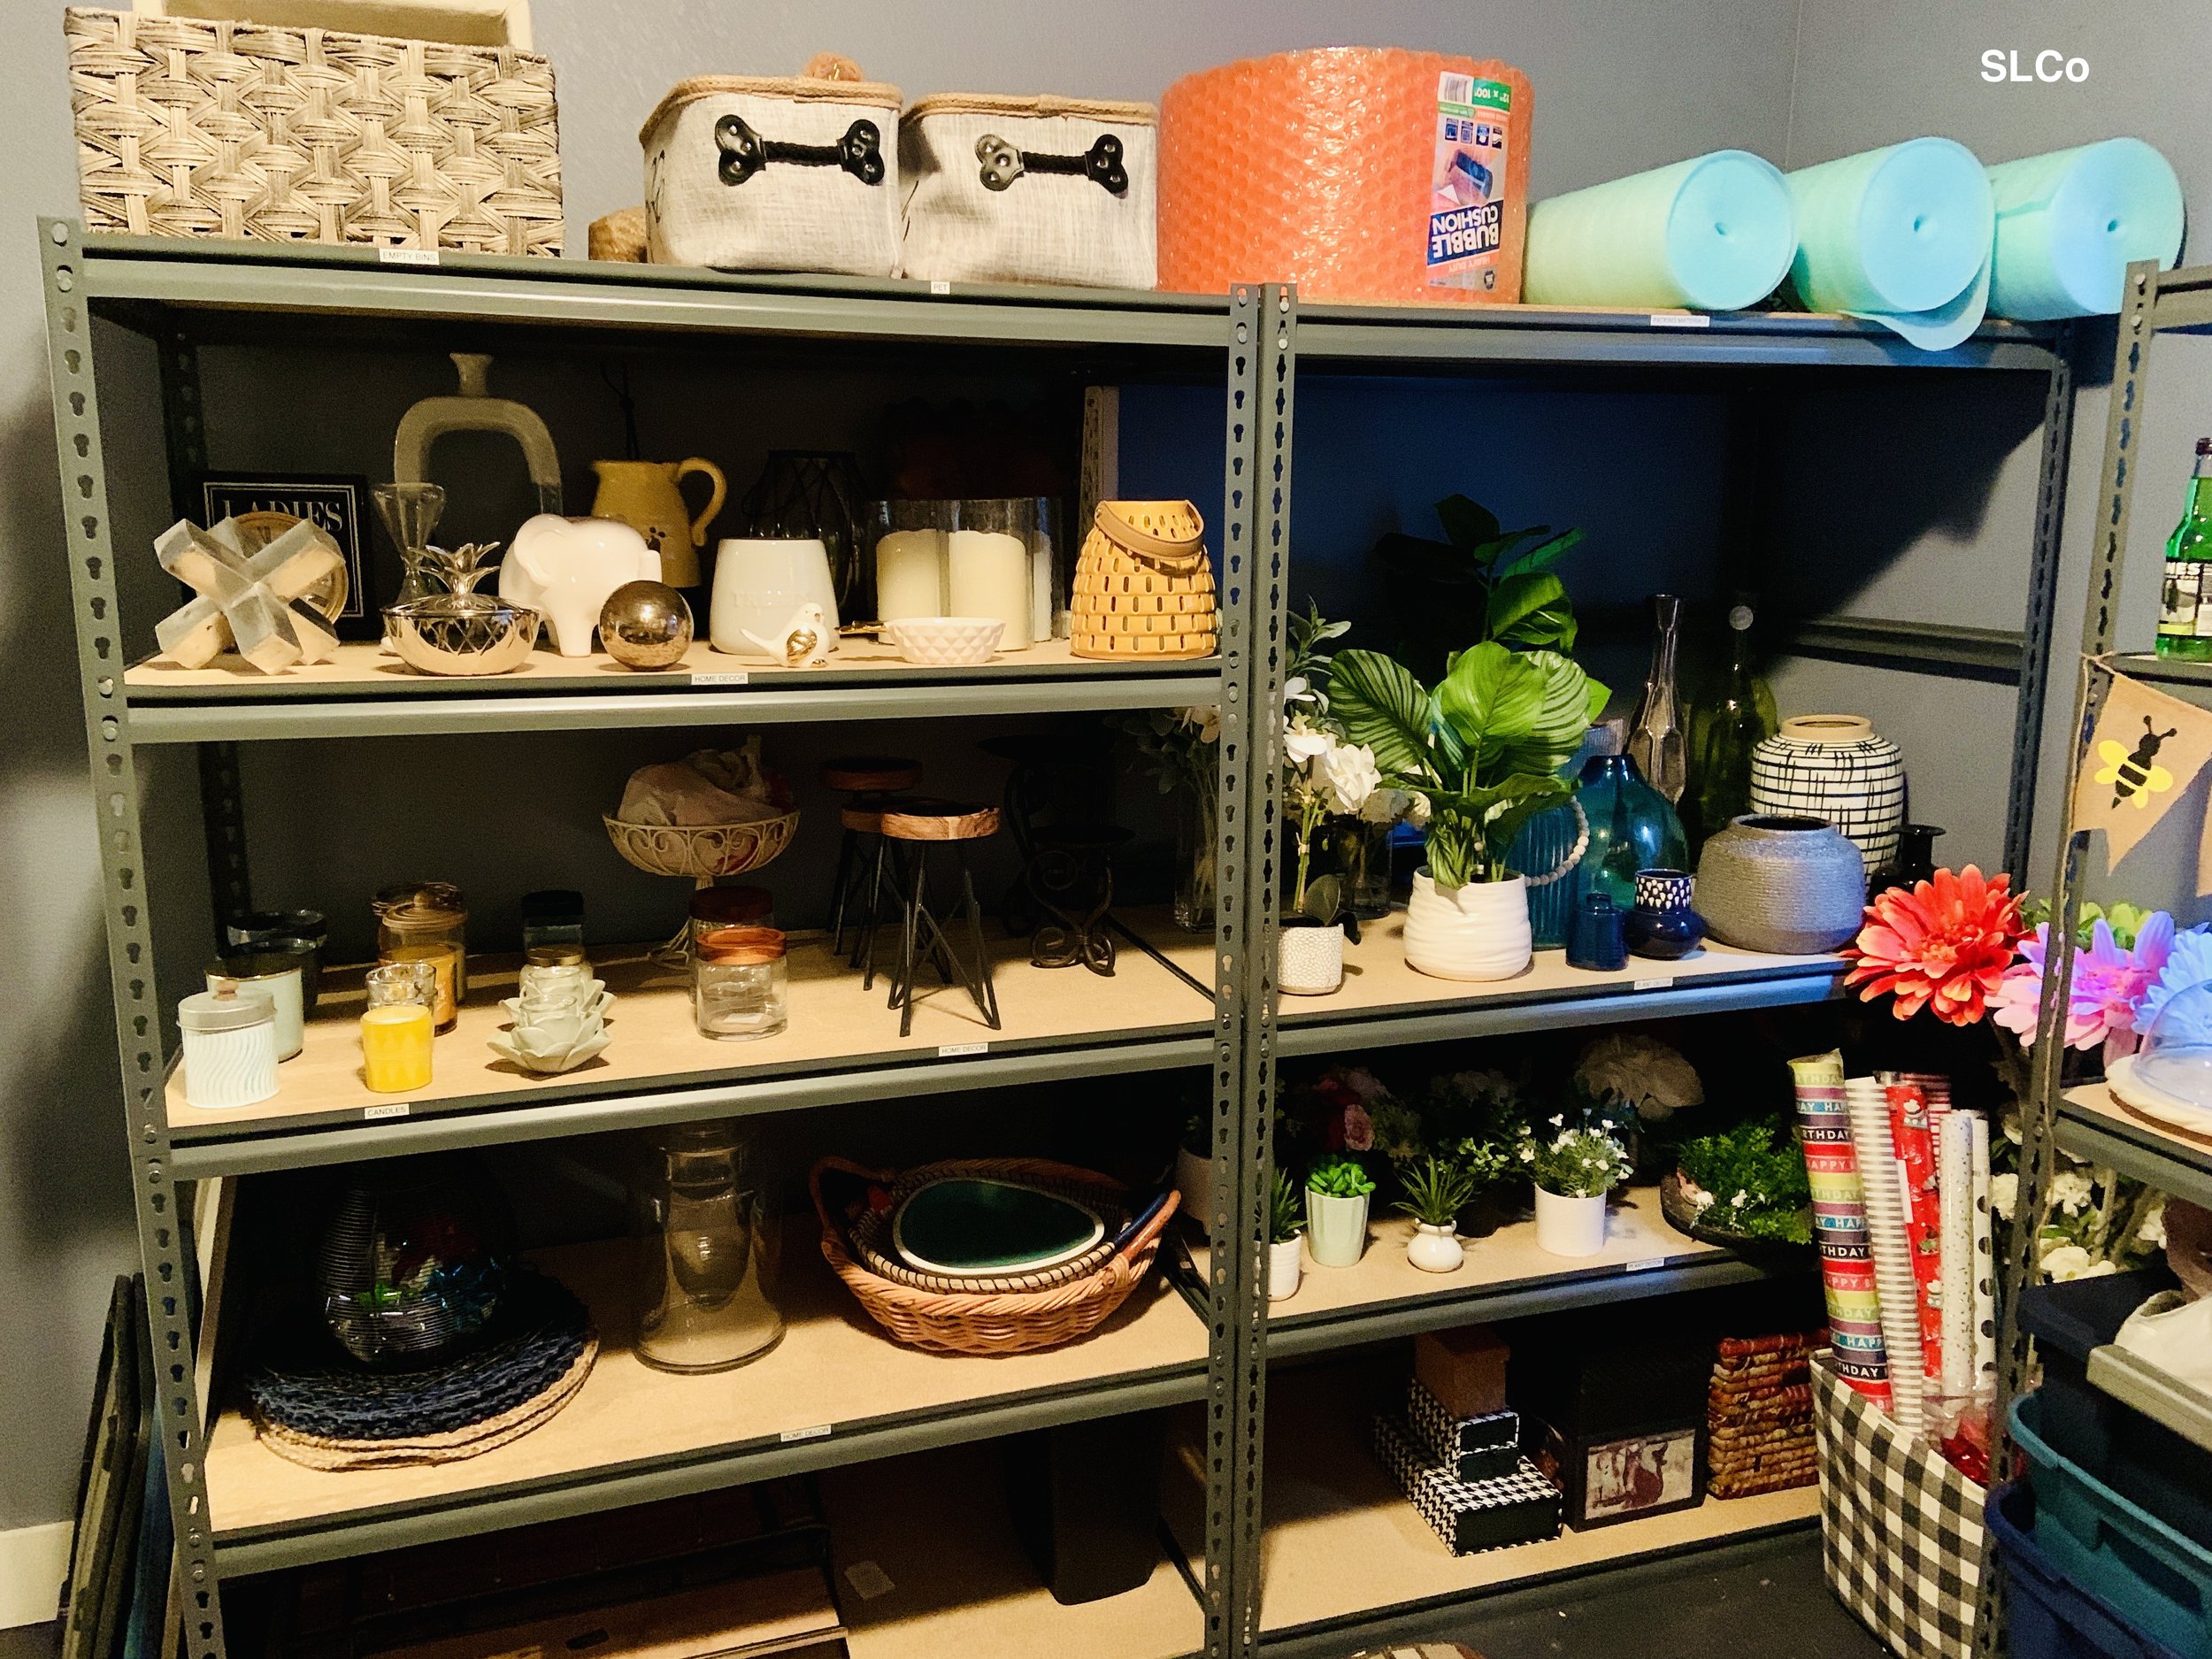 Close up of metal shelving unit with knick knacks, succulents, and miscellaneous items organized